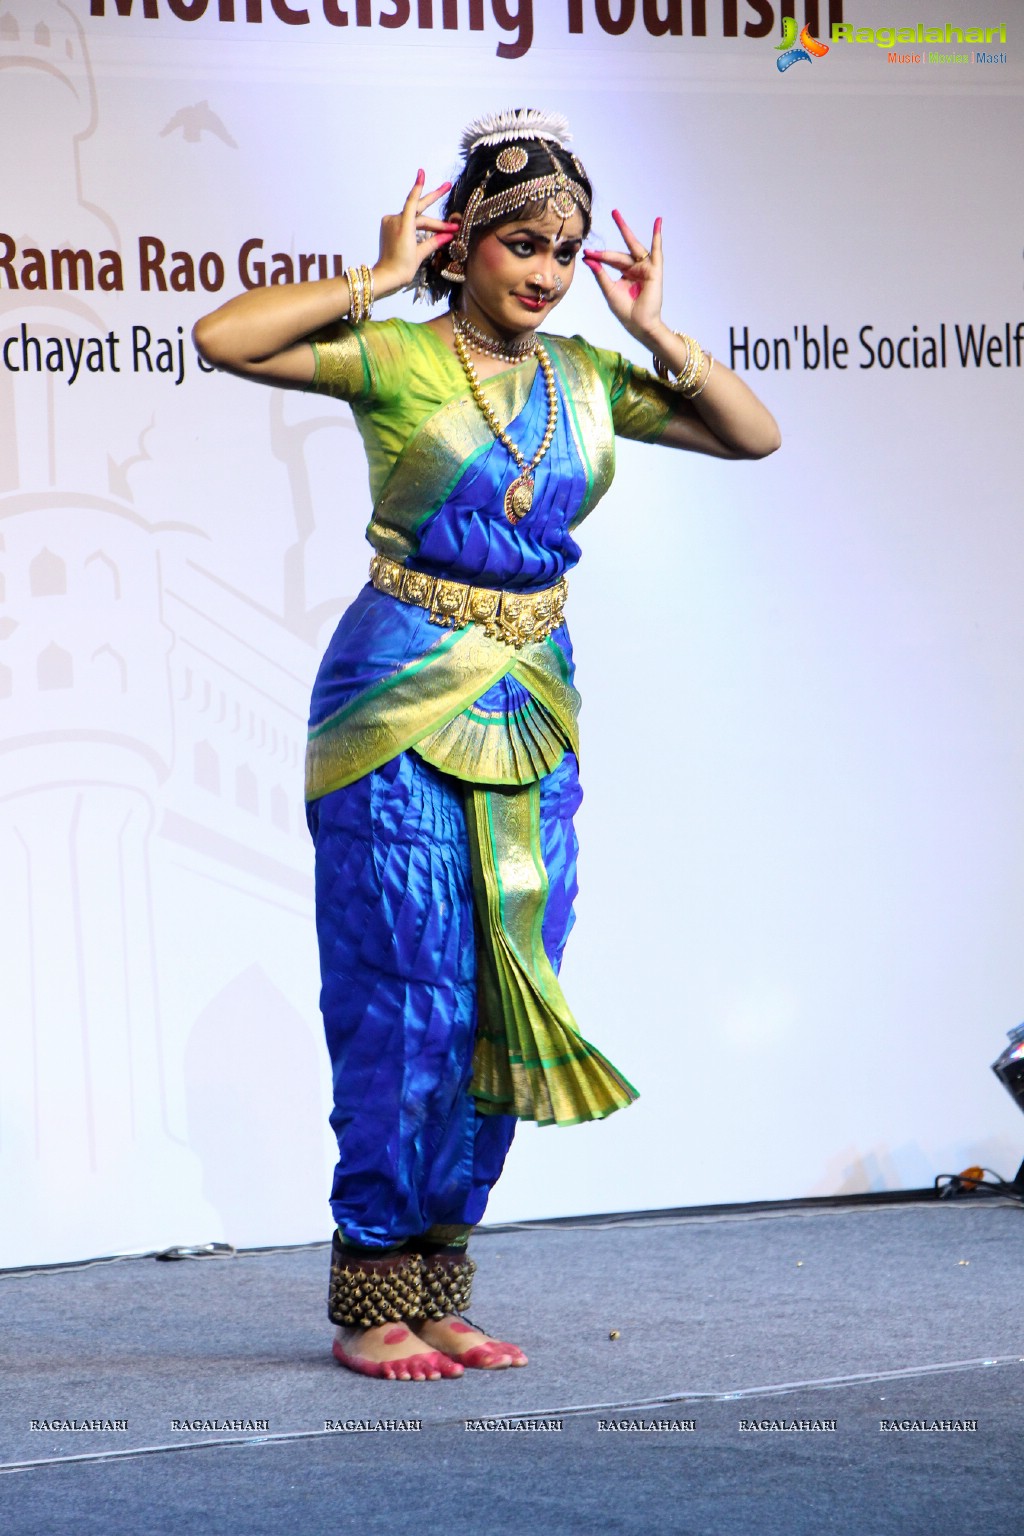 The South India Hotels & Restaurants Association (SIHRA) Convention 2015, Hyderabad